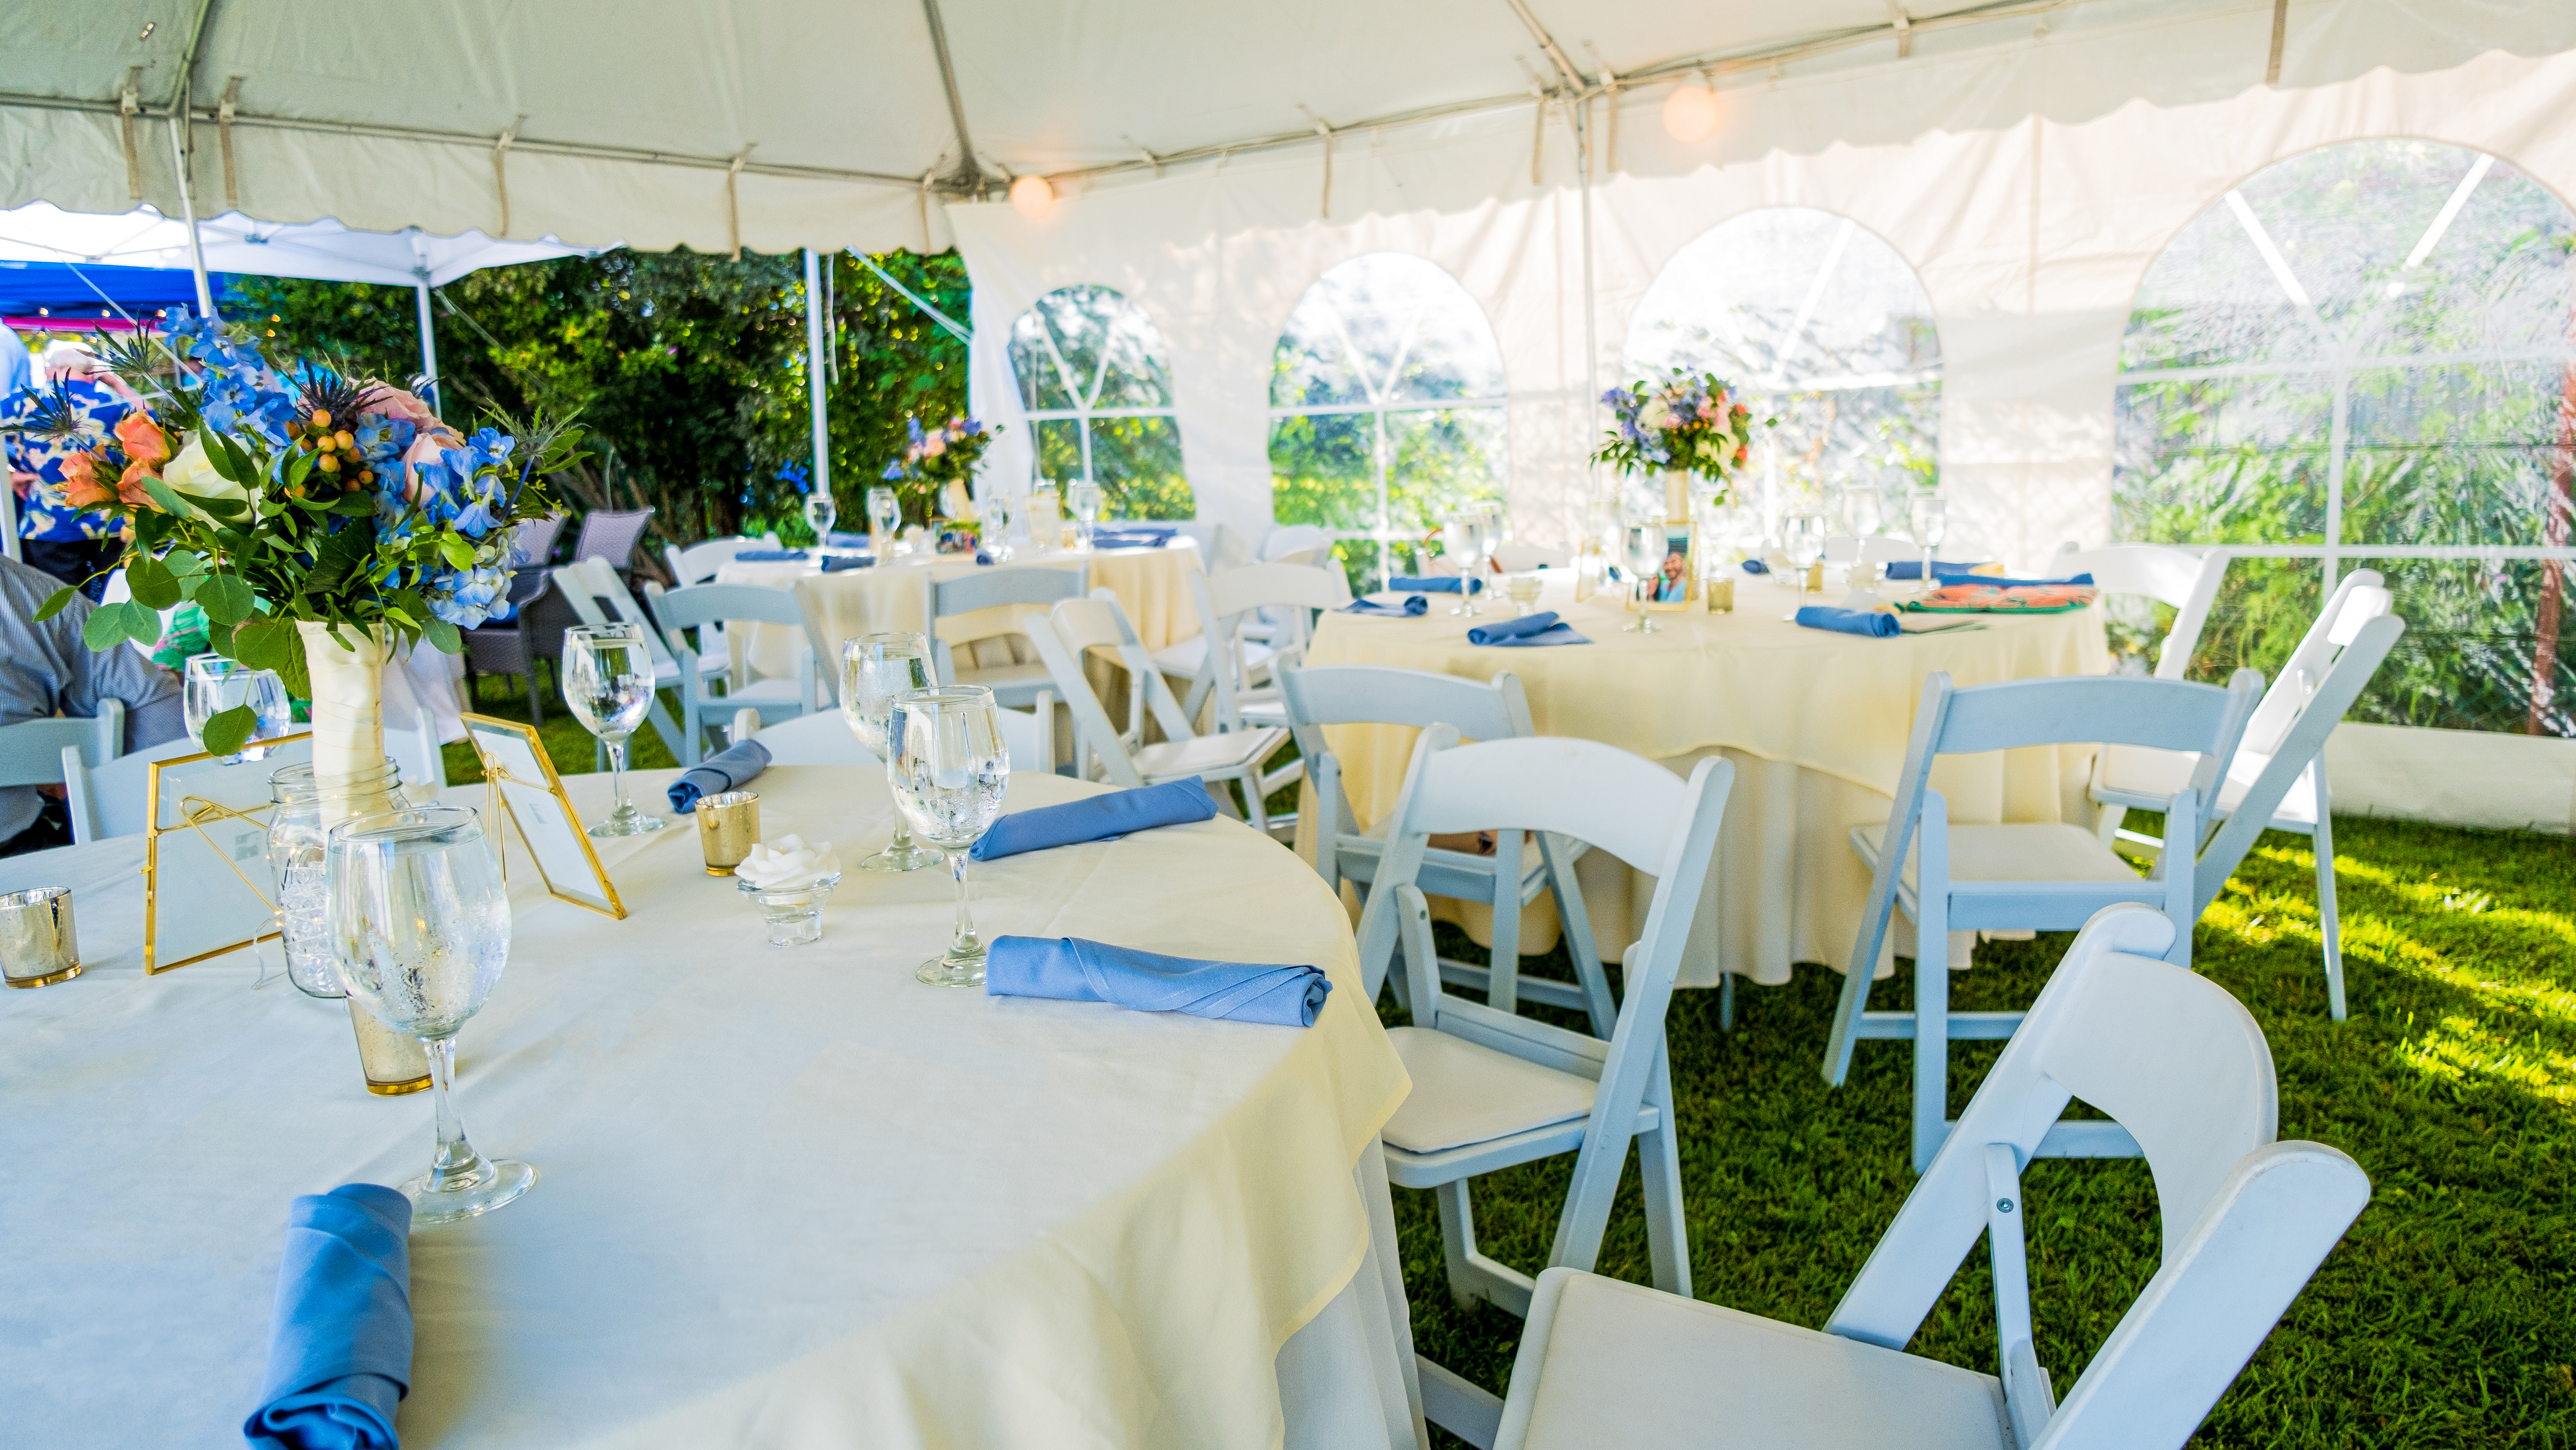 An outdoor wedding reception set up underneath a white tent. Tables with ivory linens are set up with white chairs. Blue napkins and blue flower arrangements are on the tables. 